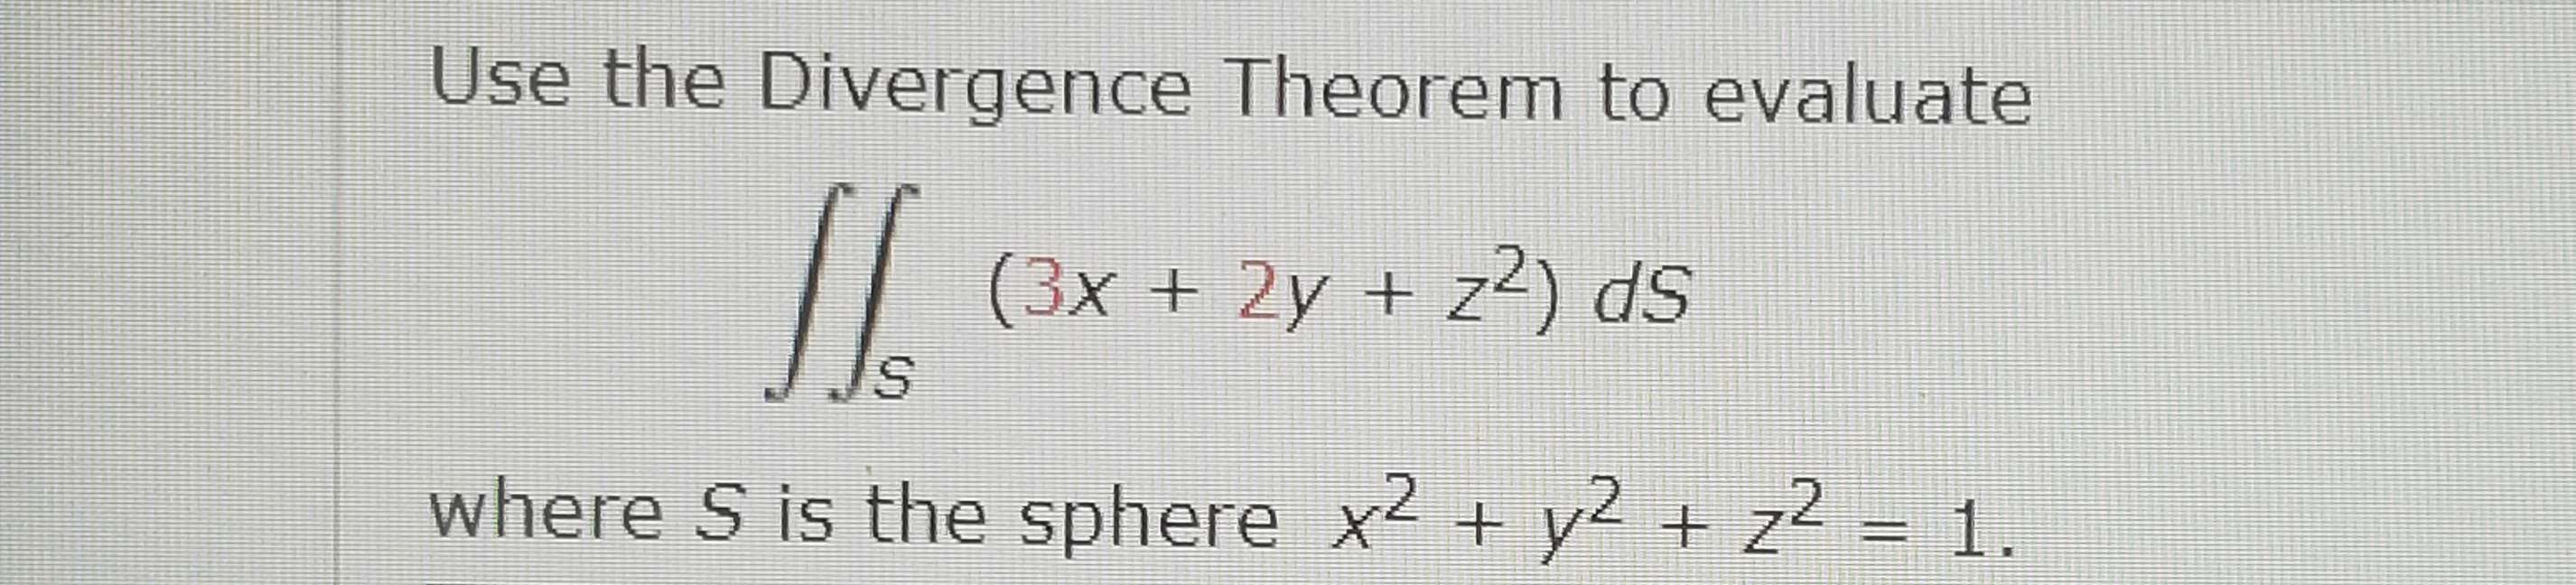 Use the Divergence Theorem to evaluate
(3x + 2y + z2) ds
where S is the sphere x2 + y2 + z² = 1.
